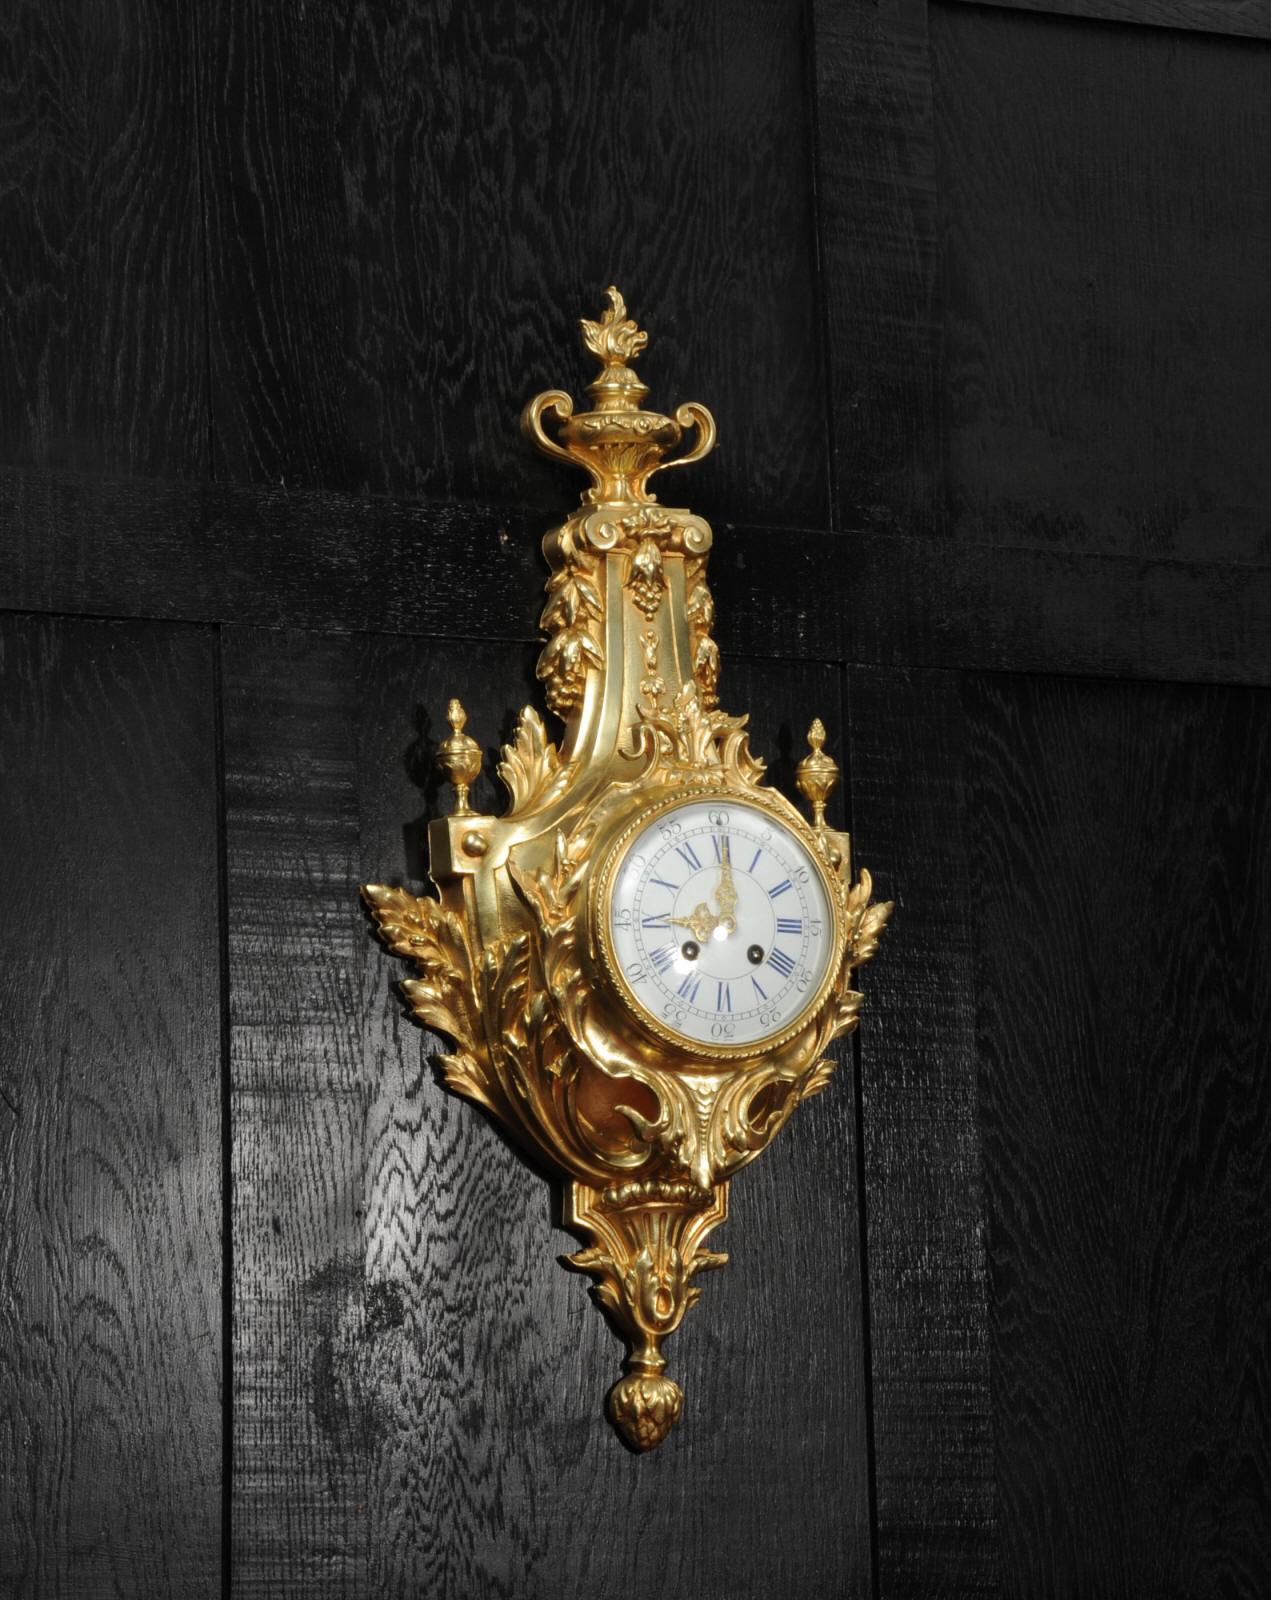 Louis XVI Antique French Gilt Bronze Cartel Wall Clock In Good Condition For Sale In Belper, Derbyshire